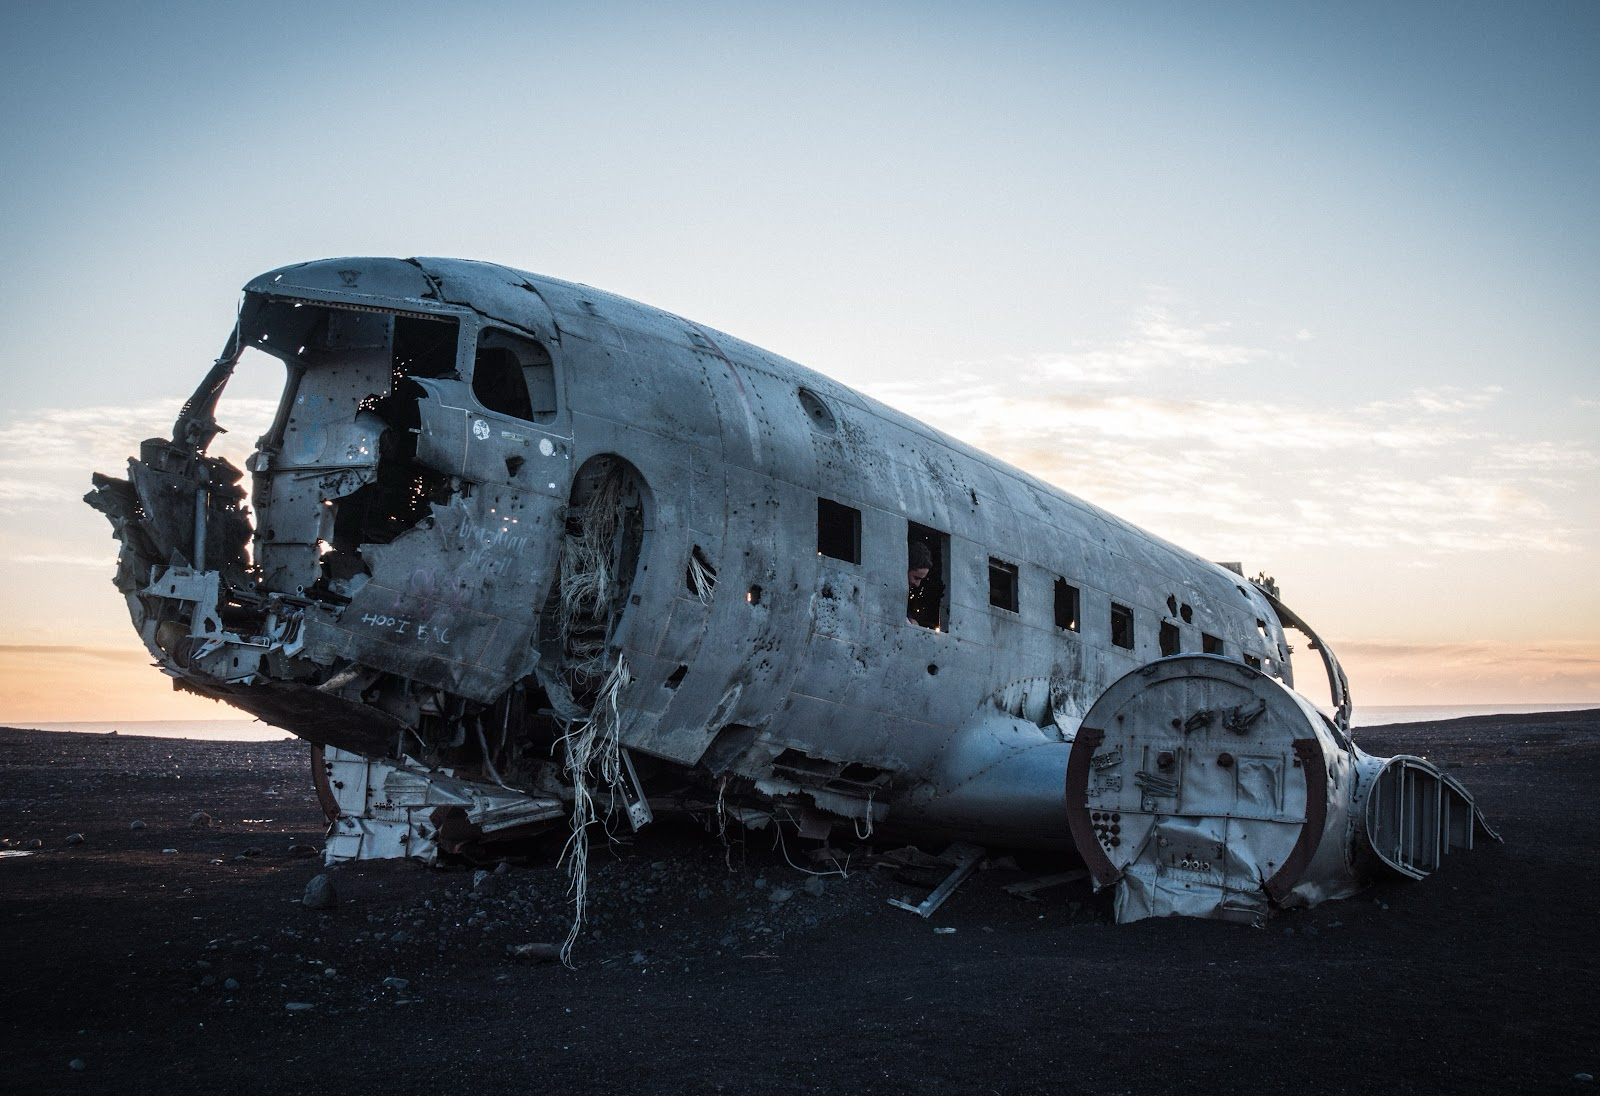 There are many boneyards throughout the country, which have sparked curiosity.  
Pictured: a plane with missing parts n a seemingly barren land during sunset